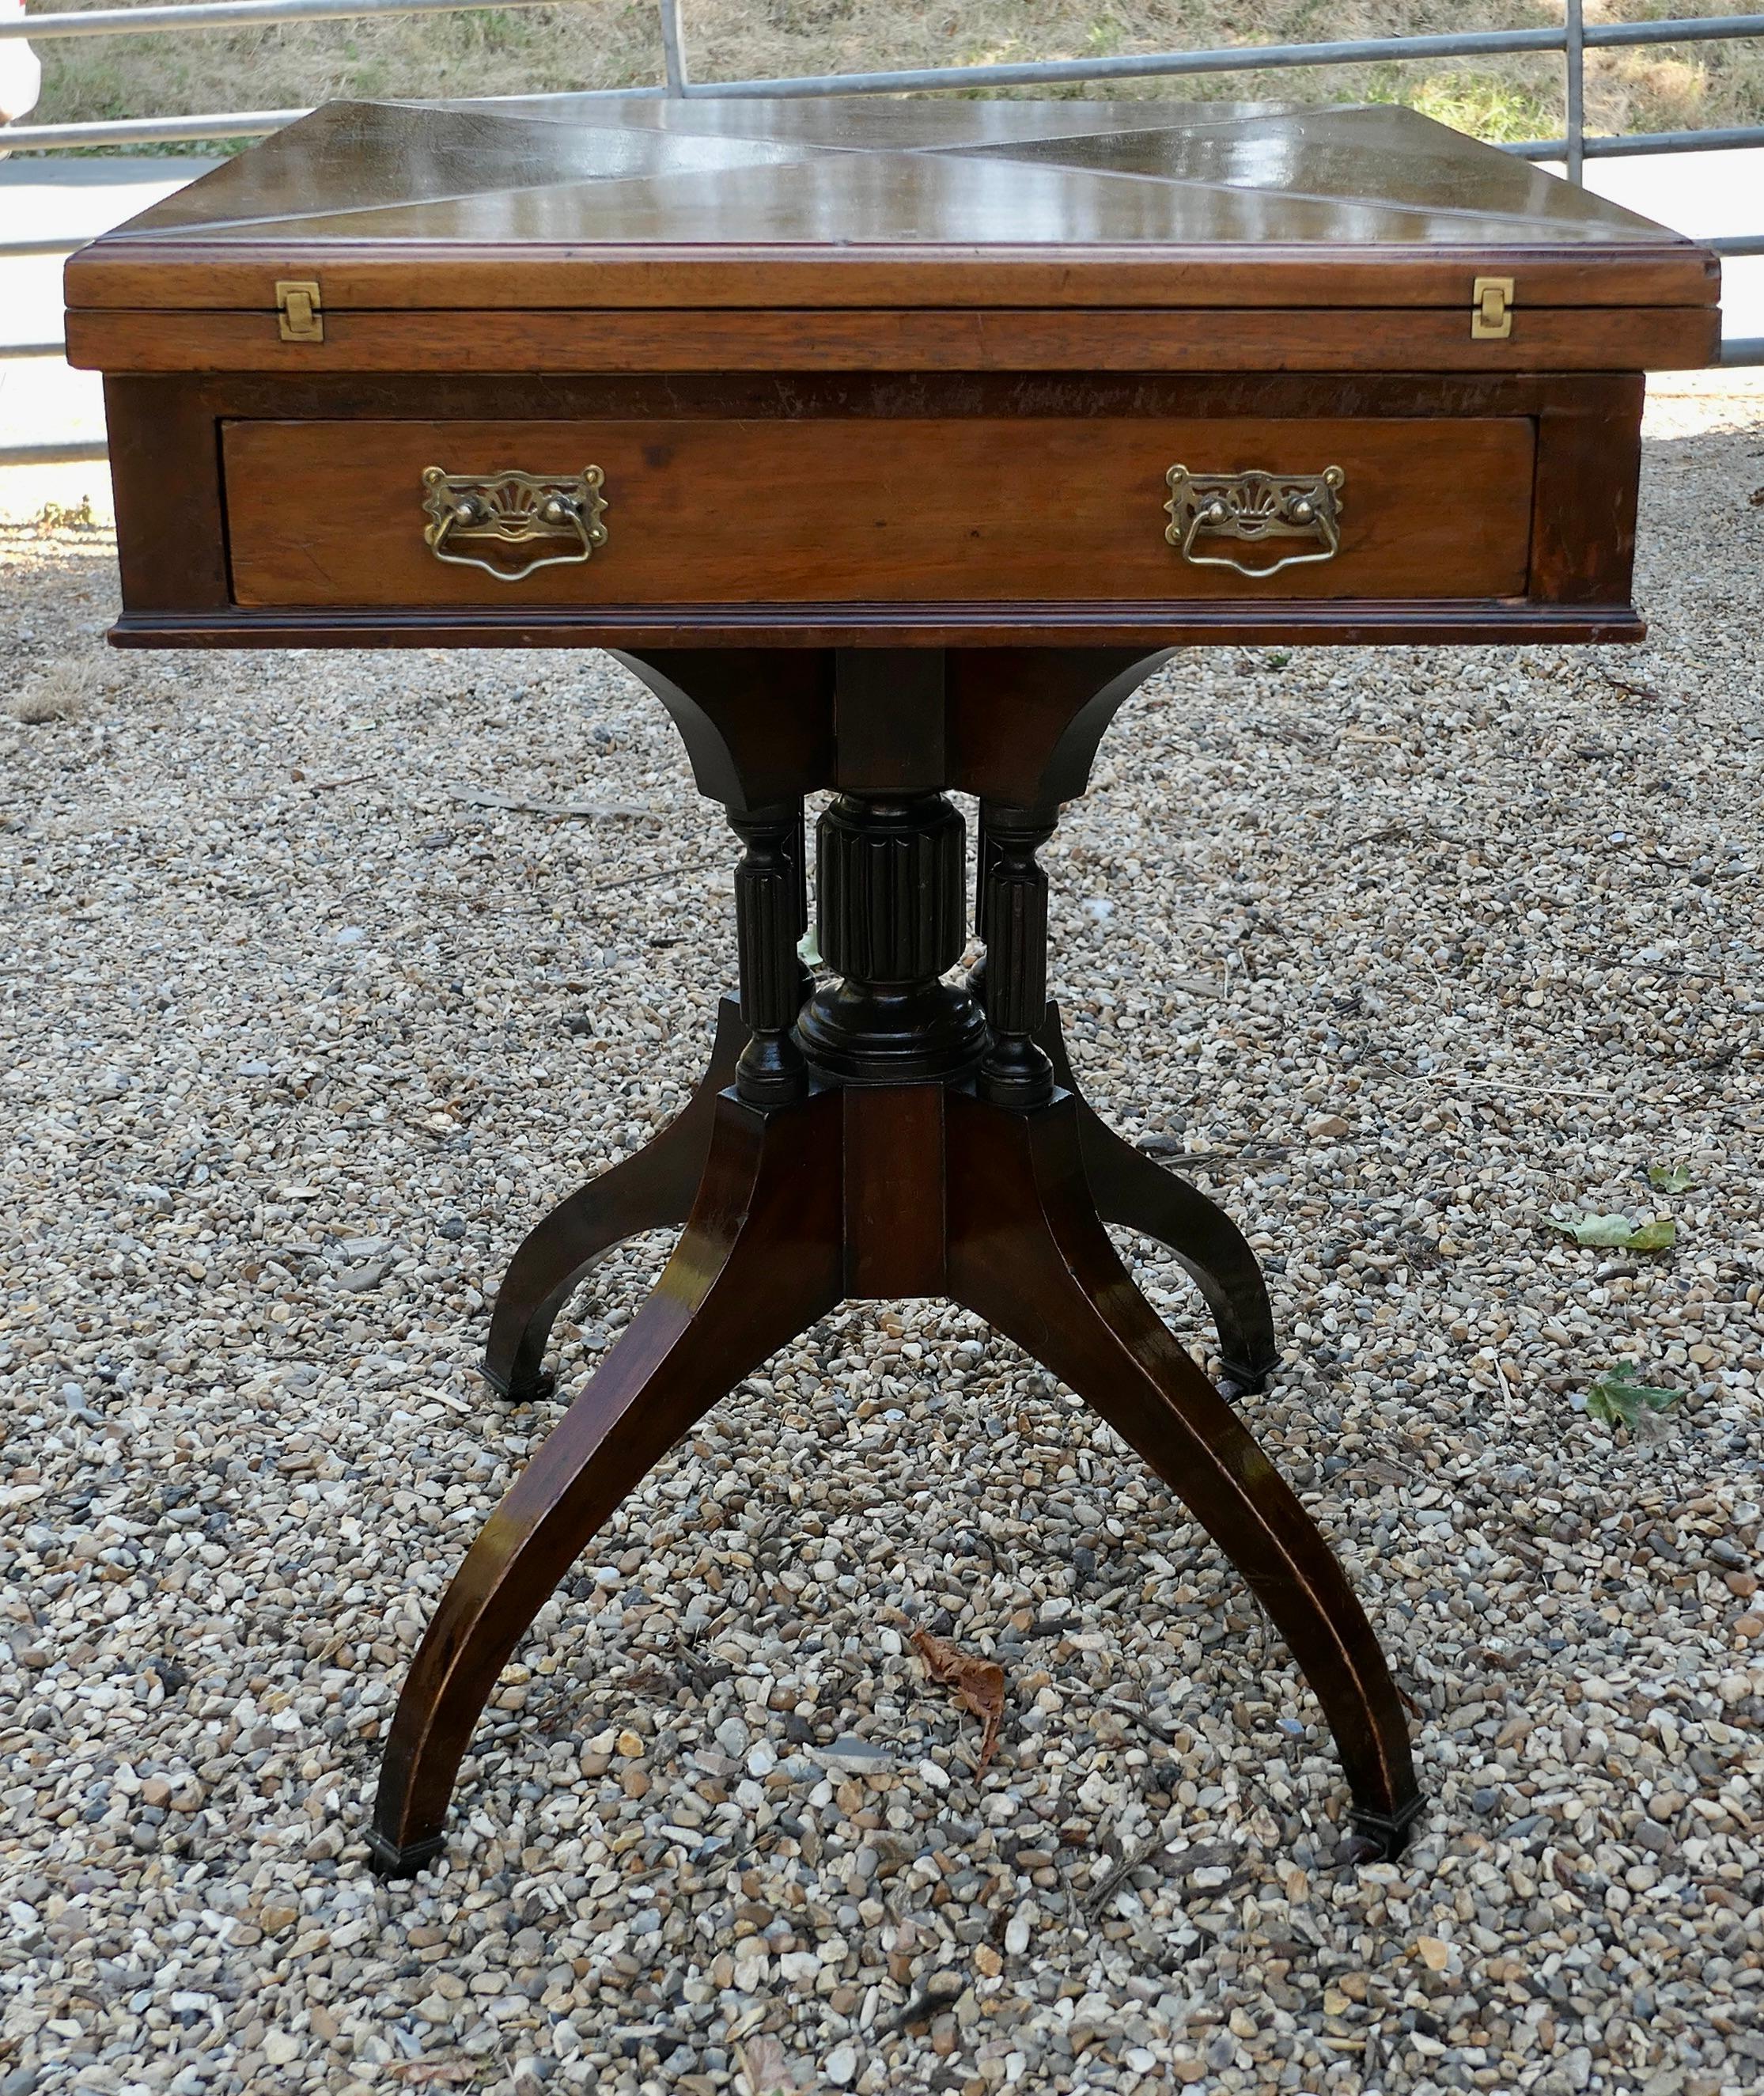 Late Victorian envelope card table with gaming wells.

A beautifully designed piece, the sturdy 4 footed leg supports the 4 triangular hinged leaves which swivel and open out to reveal a good size card table with gaming wells and a recovered baize